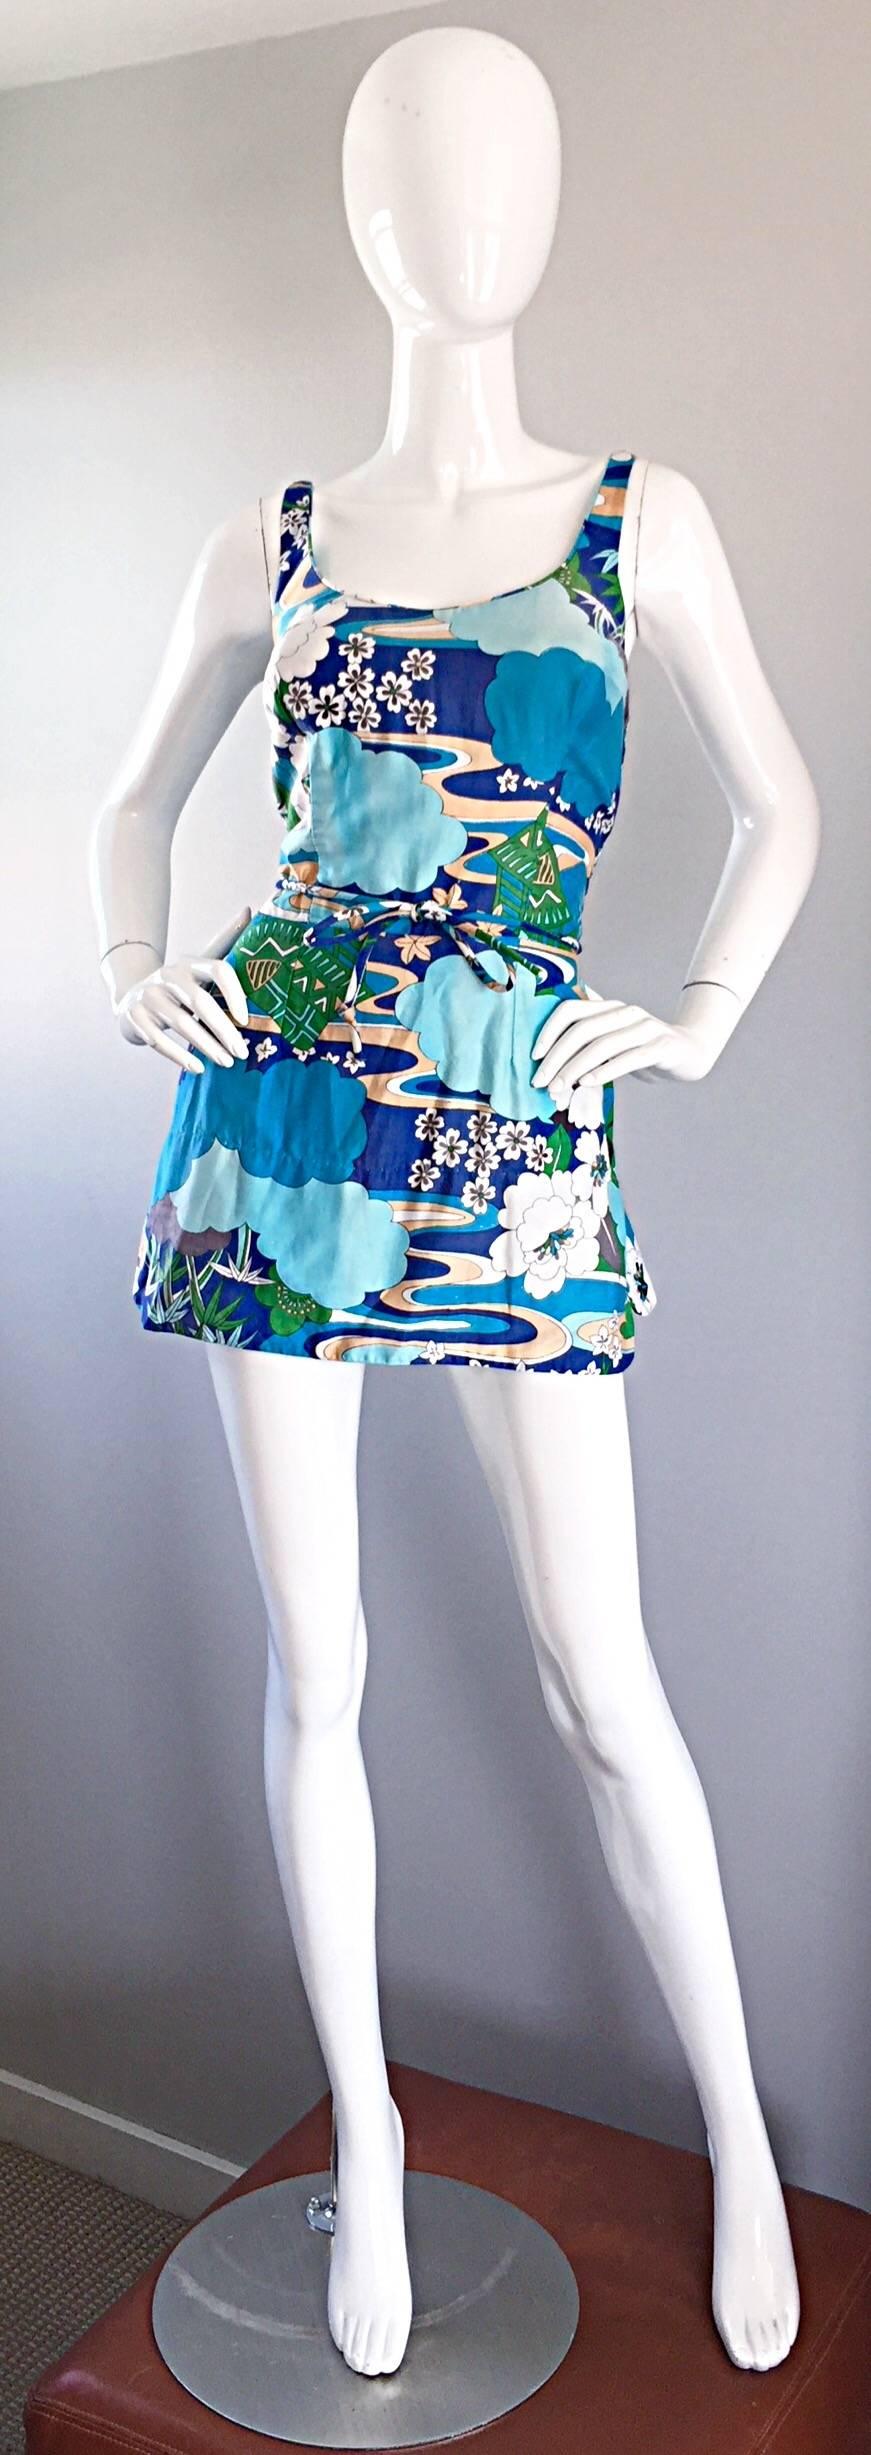 Incredible vintage 60s ROXANNE PERFECTION FIT one piece swimsuit, playsuit, romper, or onesie! Features a Chinese themed print amongst blue and white clouds. Vibrant colors of blues, beige, green and white. Attached bow belt ties in the front.